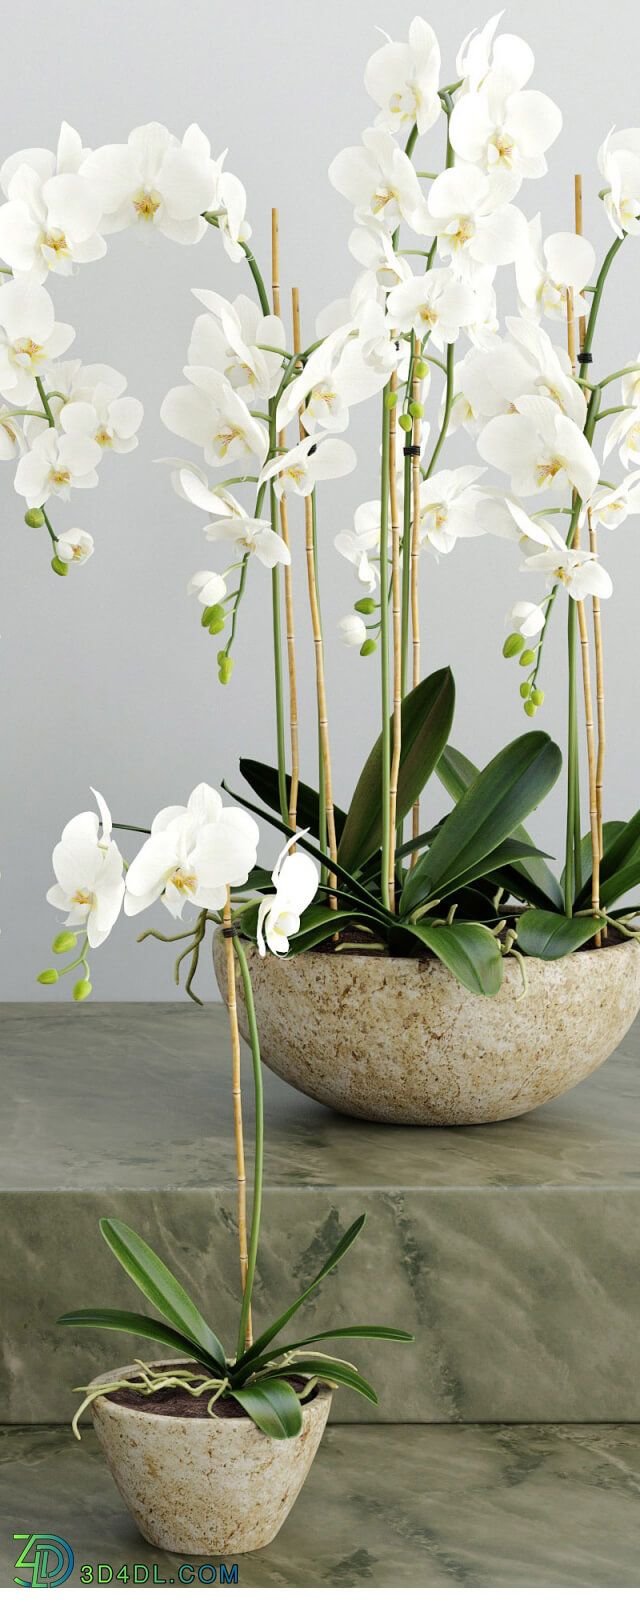 Plant - Orchid 2